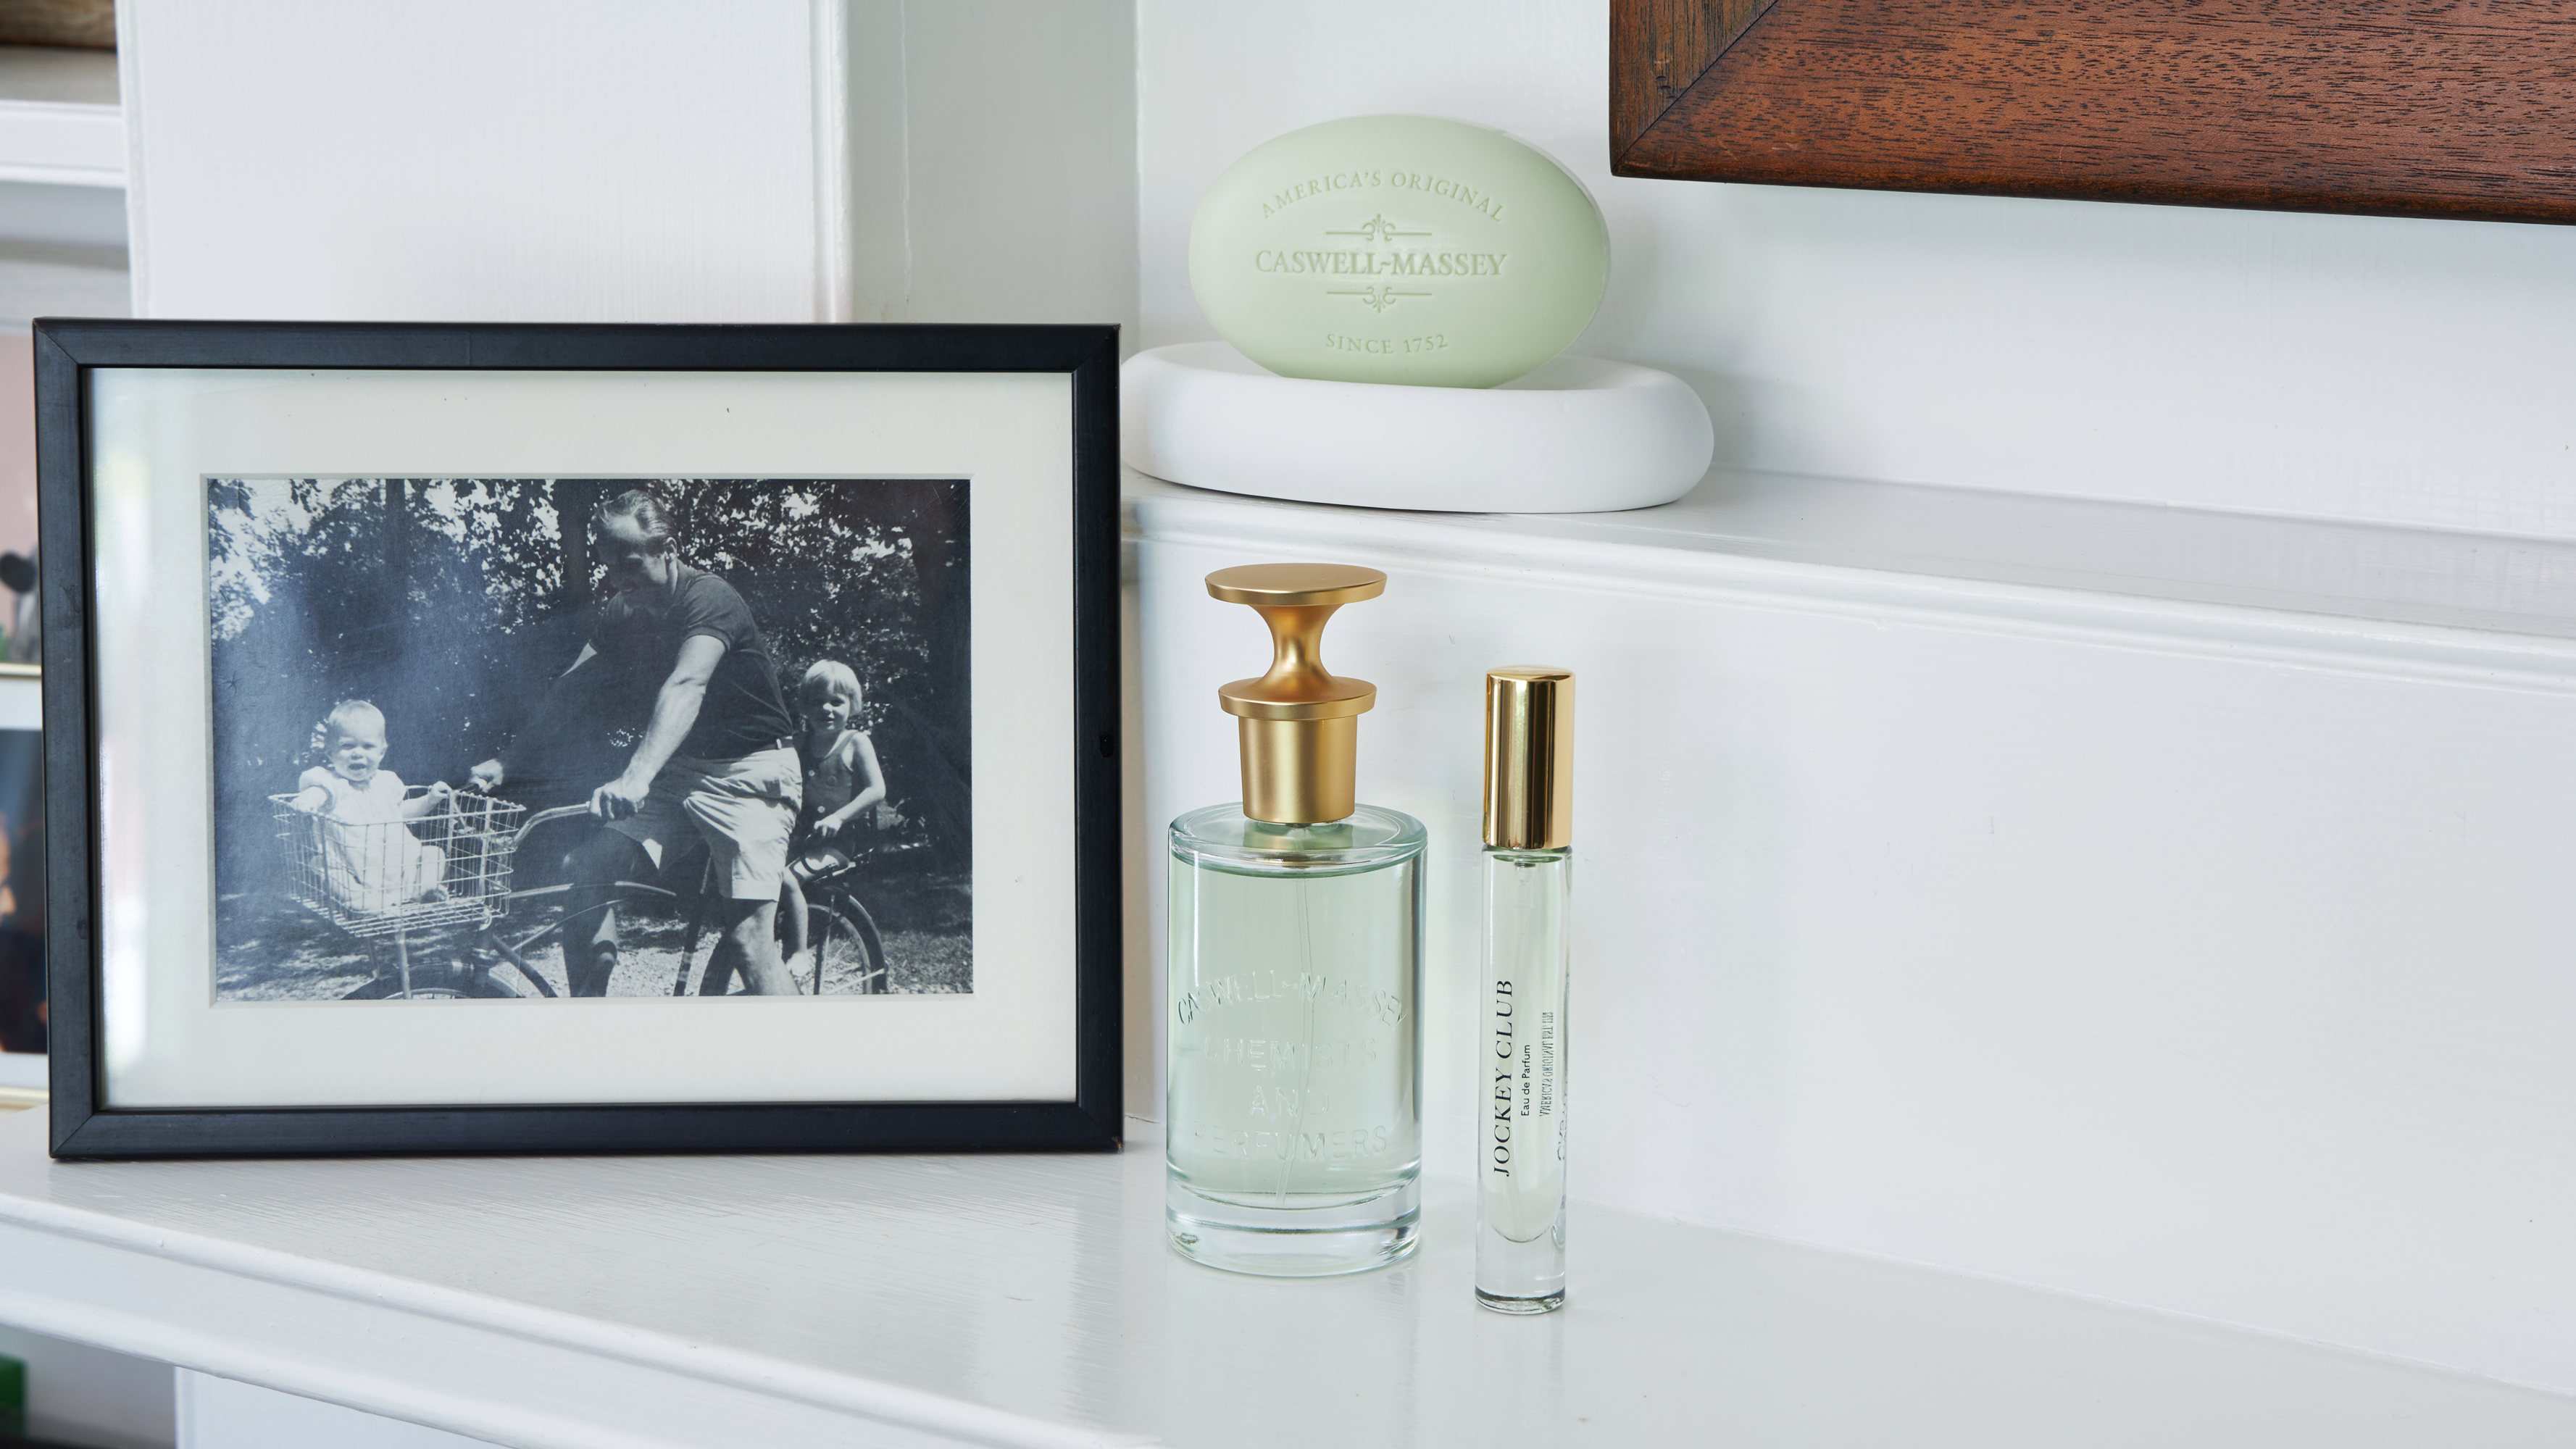 Caswell-Massey Jockey Club fragrance and soap sitting on a white mantle next to a family photo